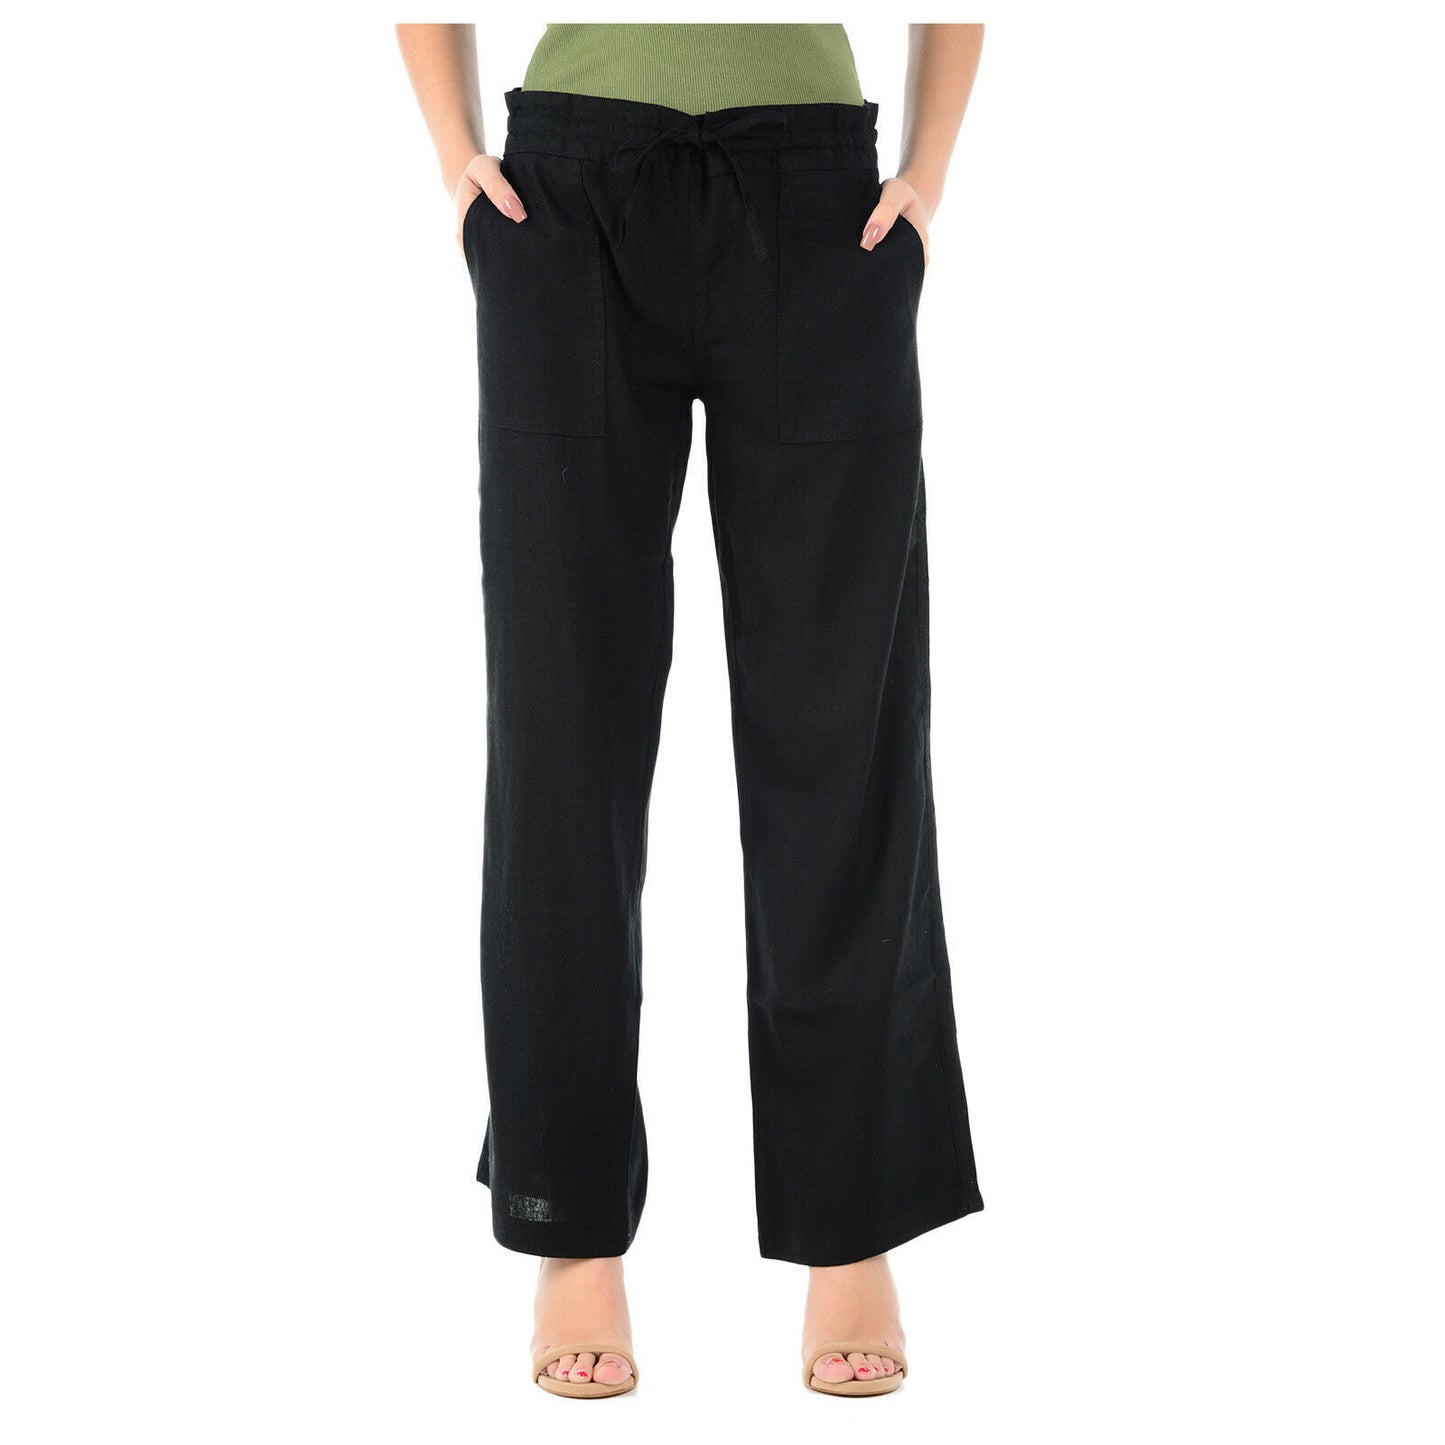 LADIES LINEN TROUSERS CASUAL HOLIDAY WOMEN SUMMER PANT ELASTICATED WAIST BOTTOMS